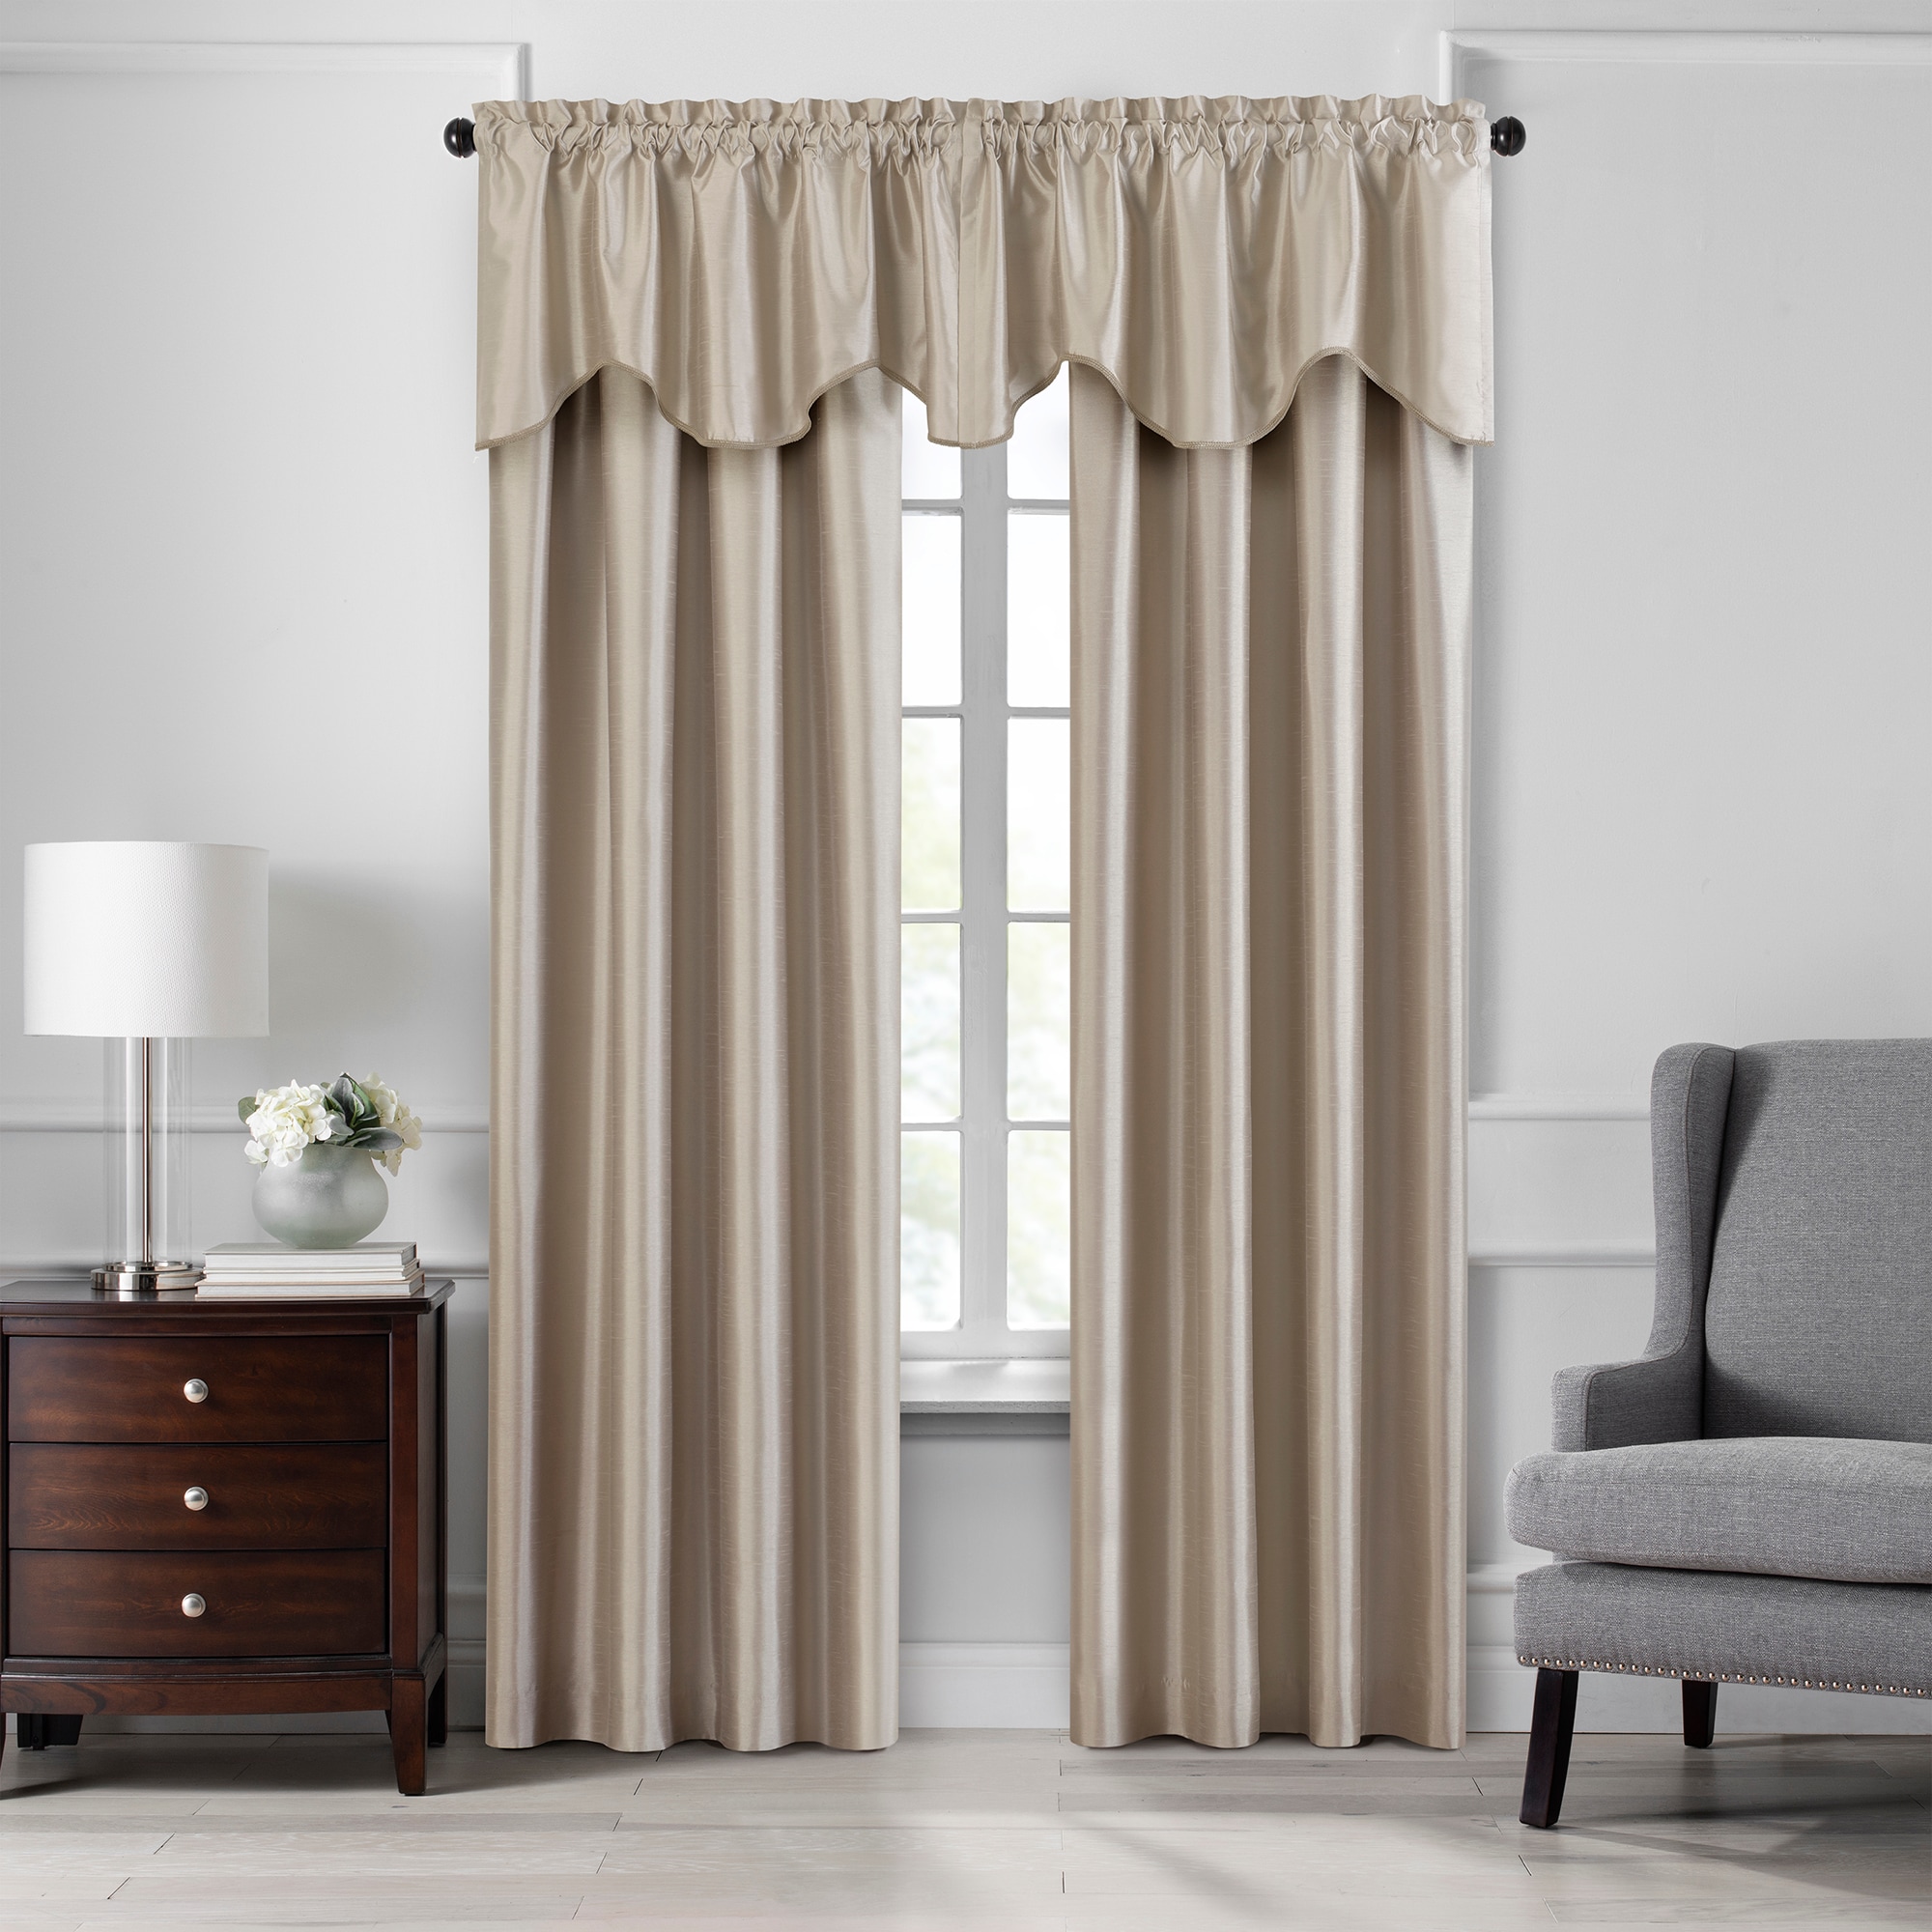 the Blackout Panel at Elrene in Standard department Fashions Single Taupe Rod Curtain Curtains Home Drapes & 95-in Lined Pocket